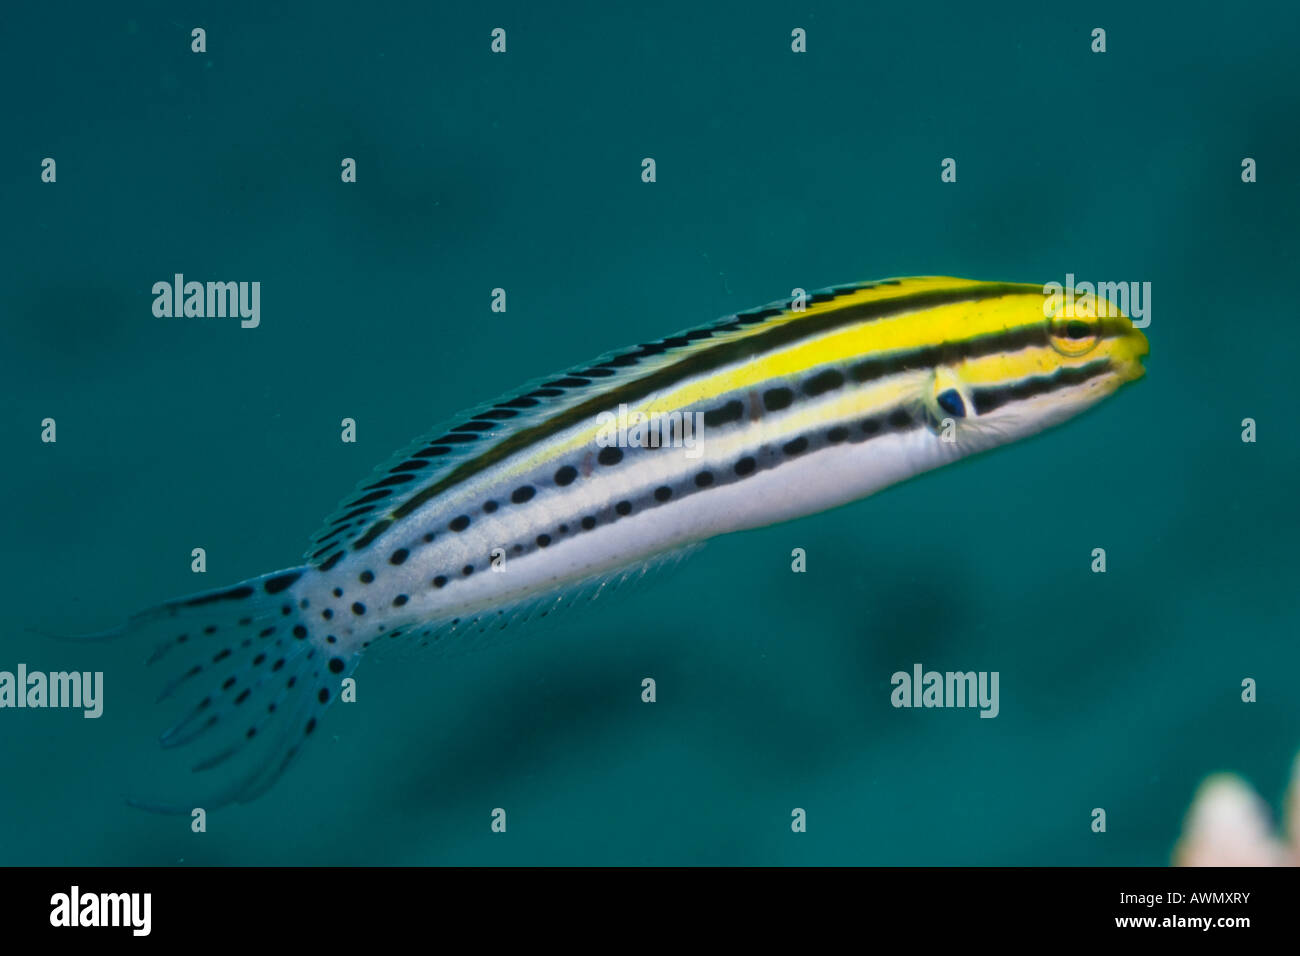 Striped Poison-Fang Blenny or Canary Blenny (Meiacanthus grammistes), Indonesia, Asia Stock Photo